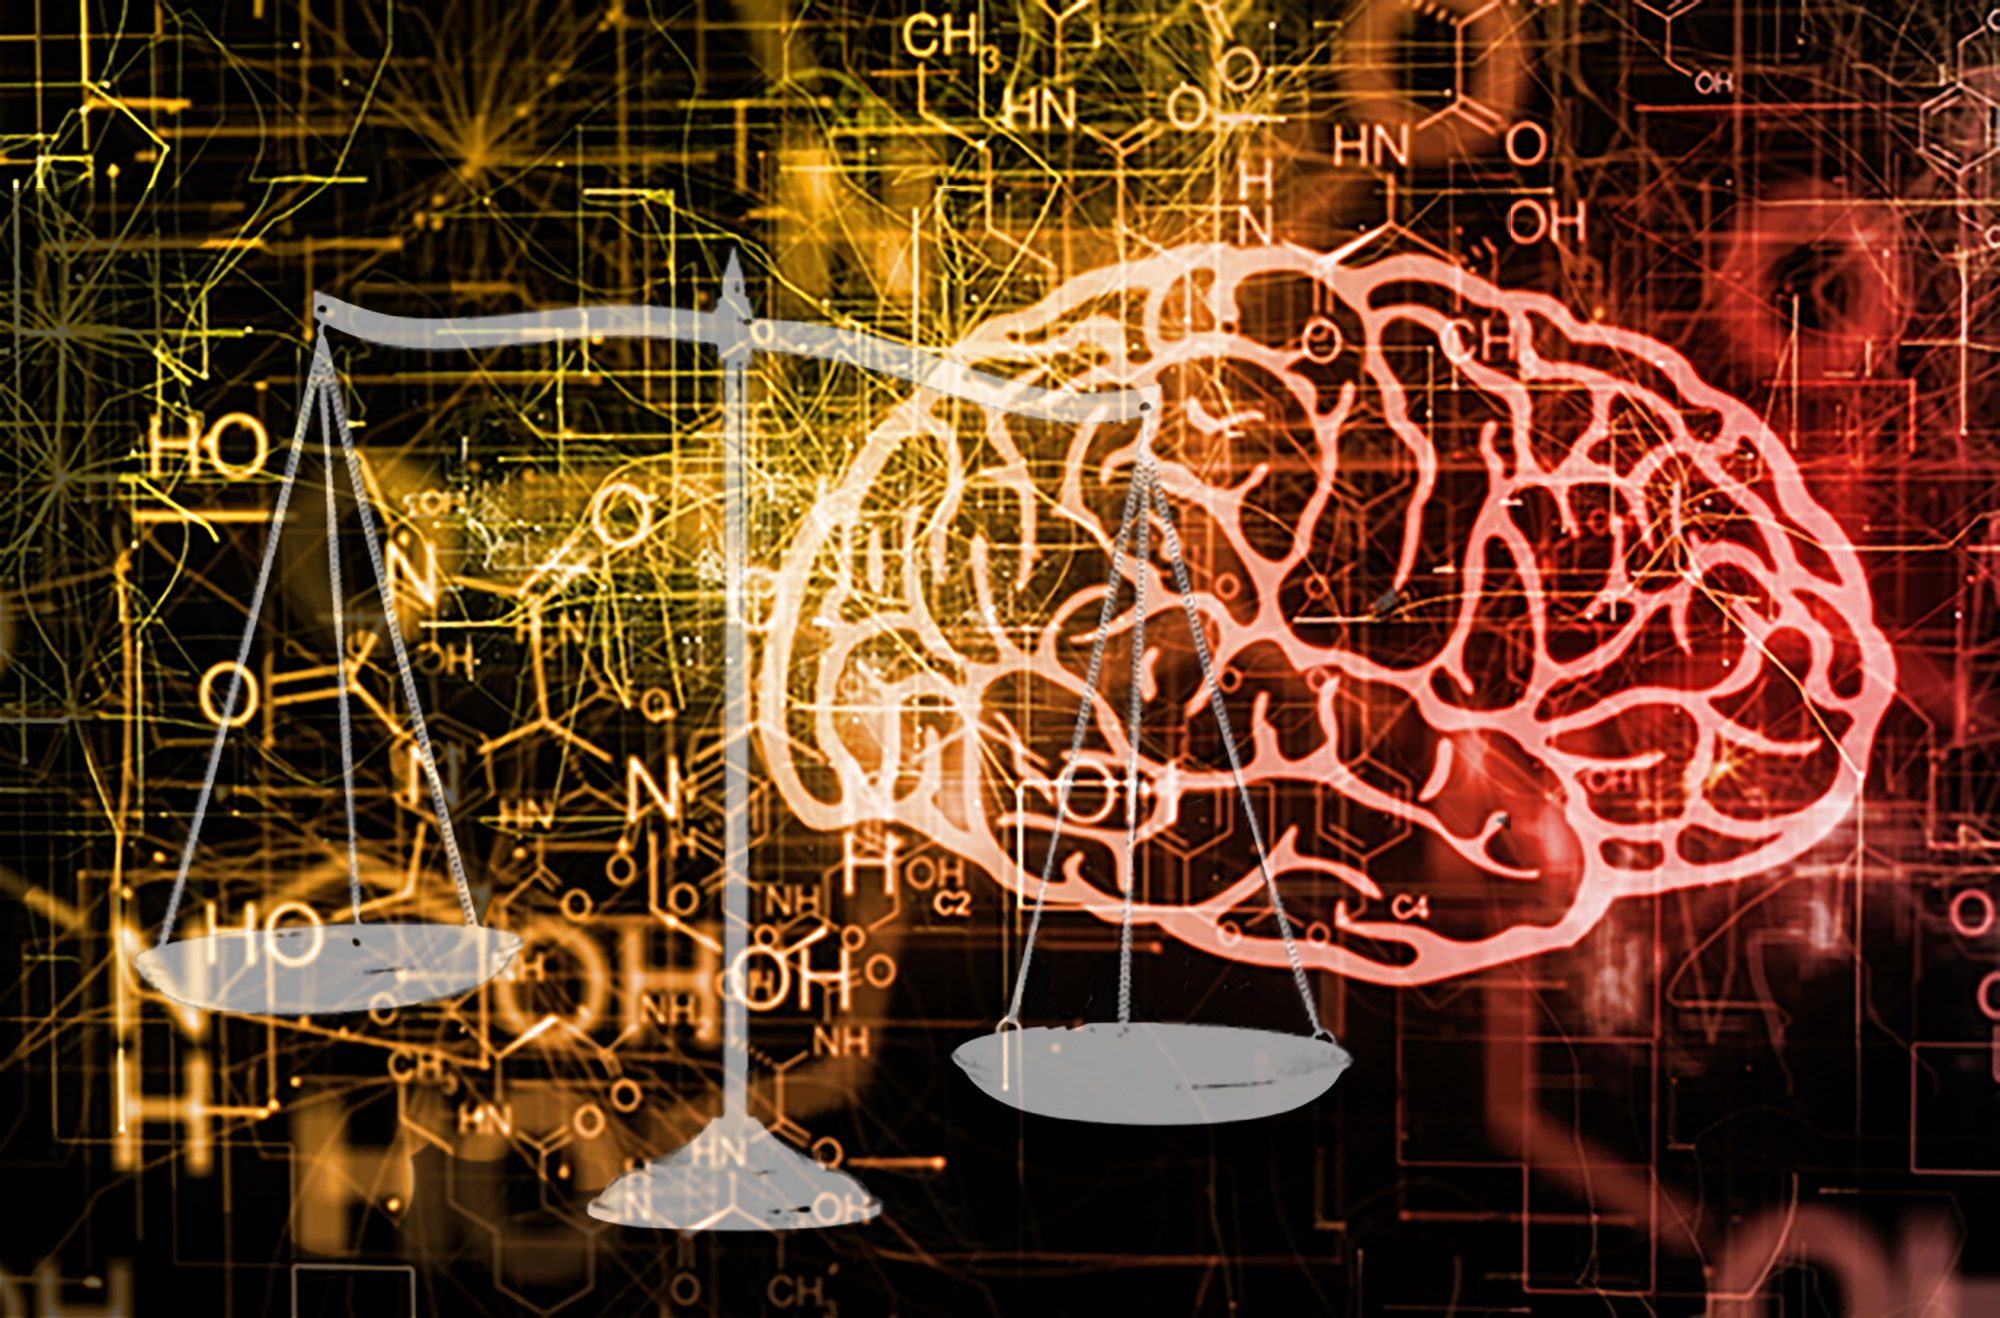 Illustration showing scales of justice and a human brain with an orange and yellow background.